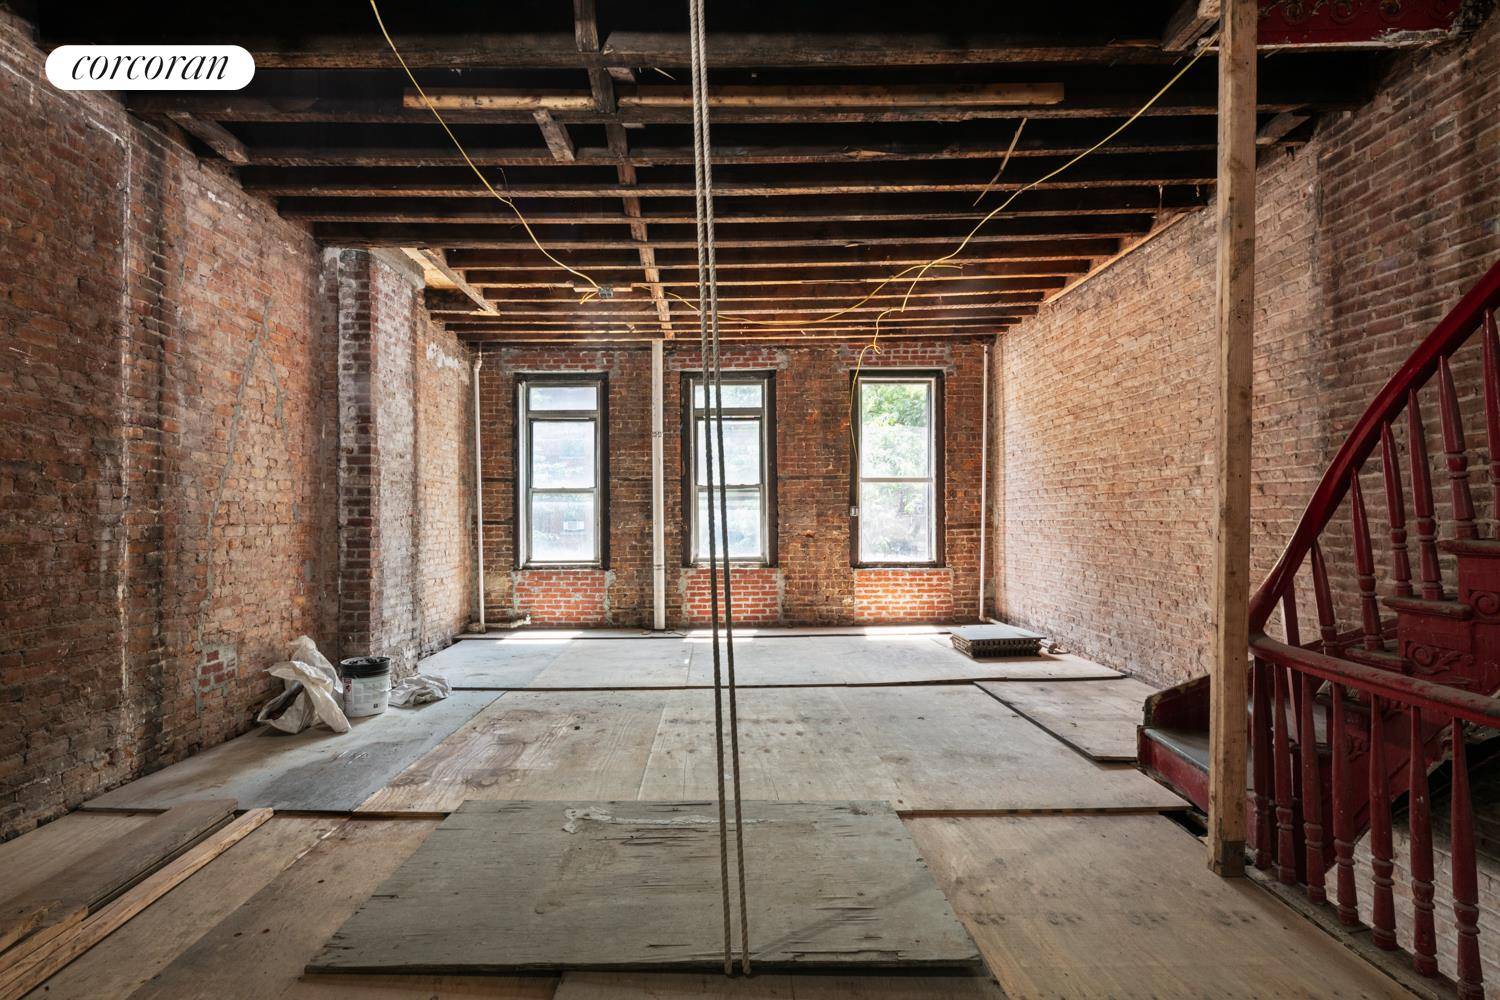 Take advantage of this rare opportunity to take artist Mark Rothko's historic East Village townhouse across the finish line !